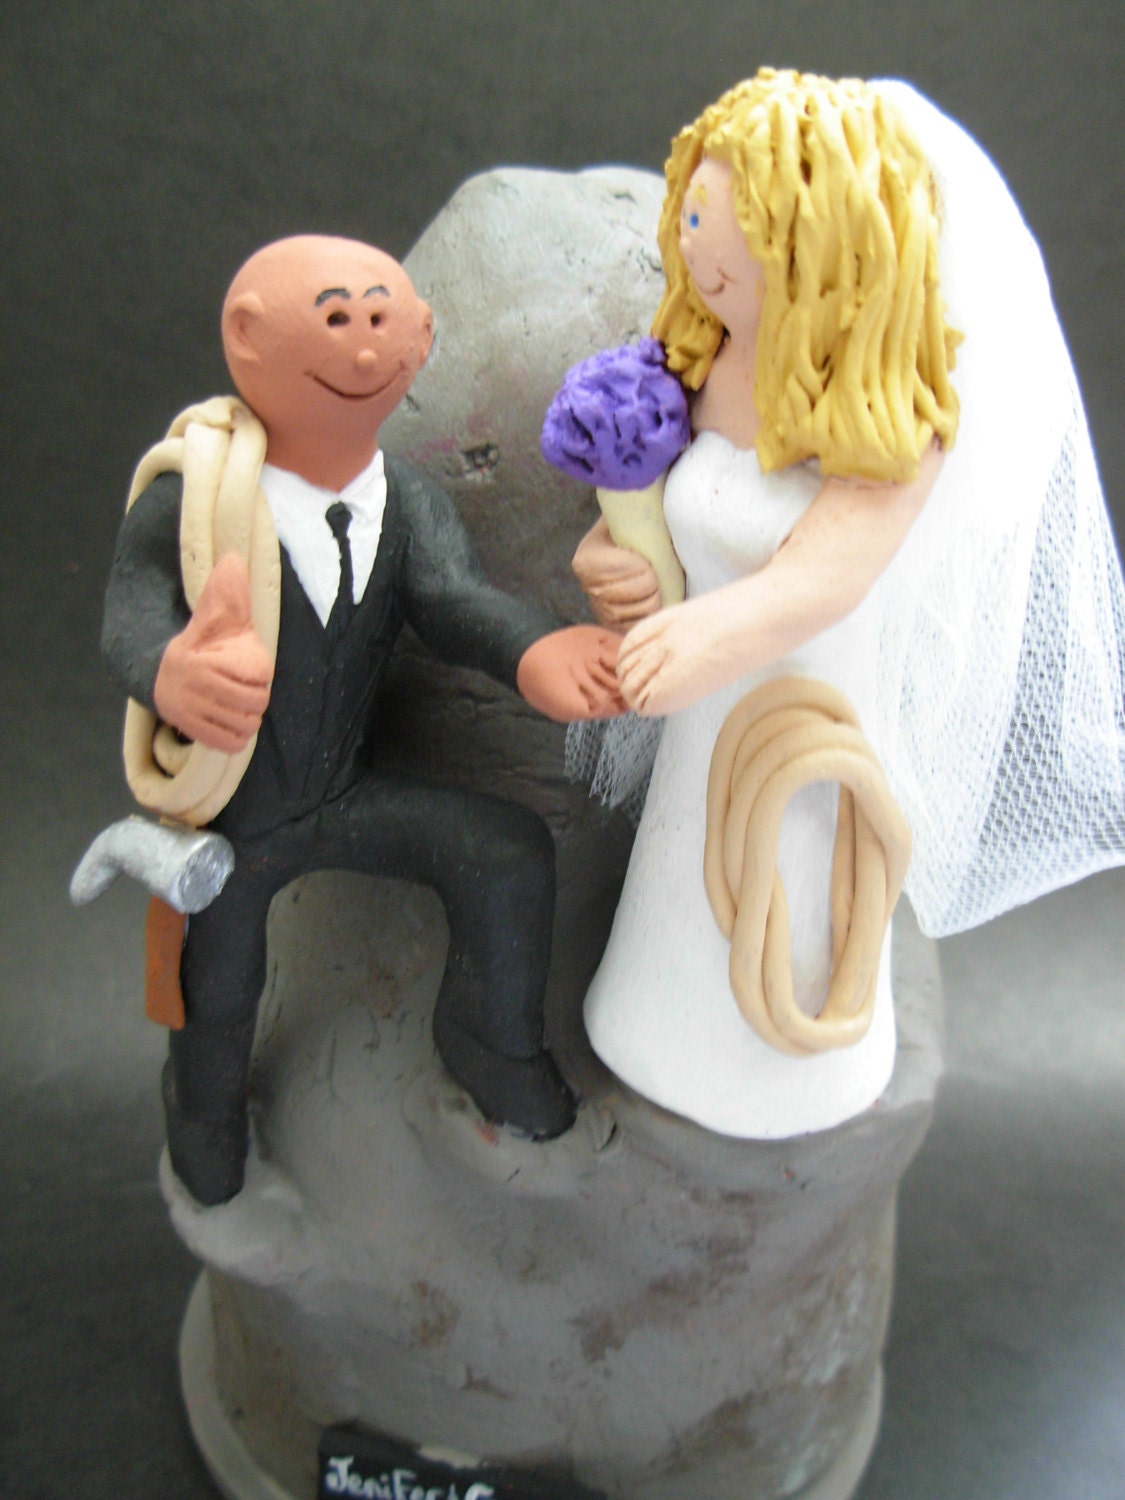 Mountain and Rock Climbers Wedding Cake Topper, Mountaineering Wedding Cake Topper, Mixed Race Wedding Cake Topper,Hikers Wedding CakeTopper